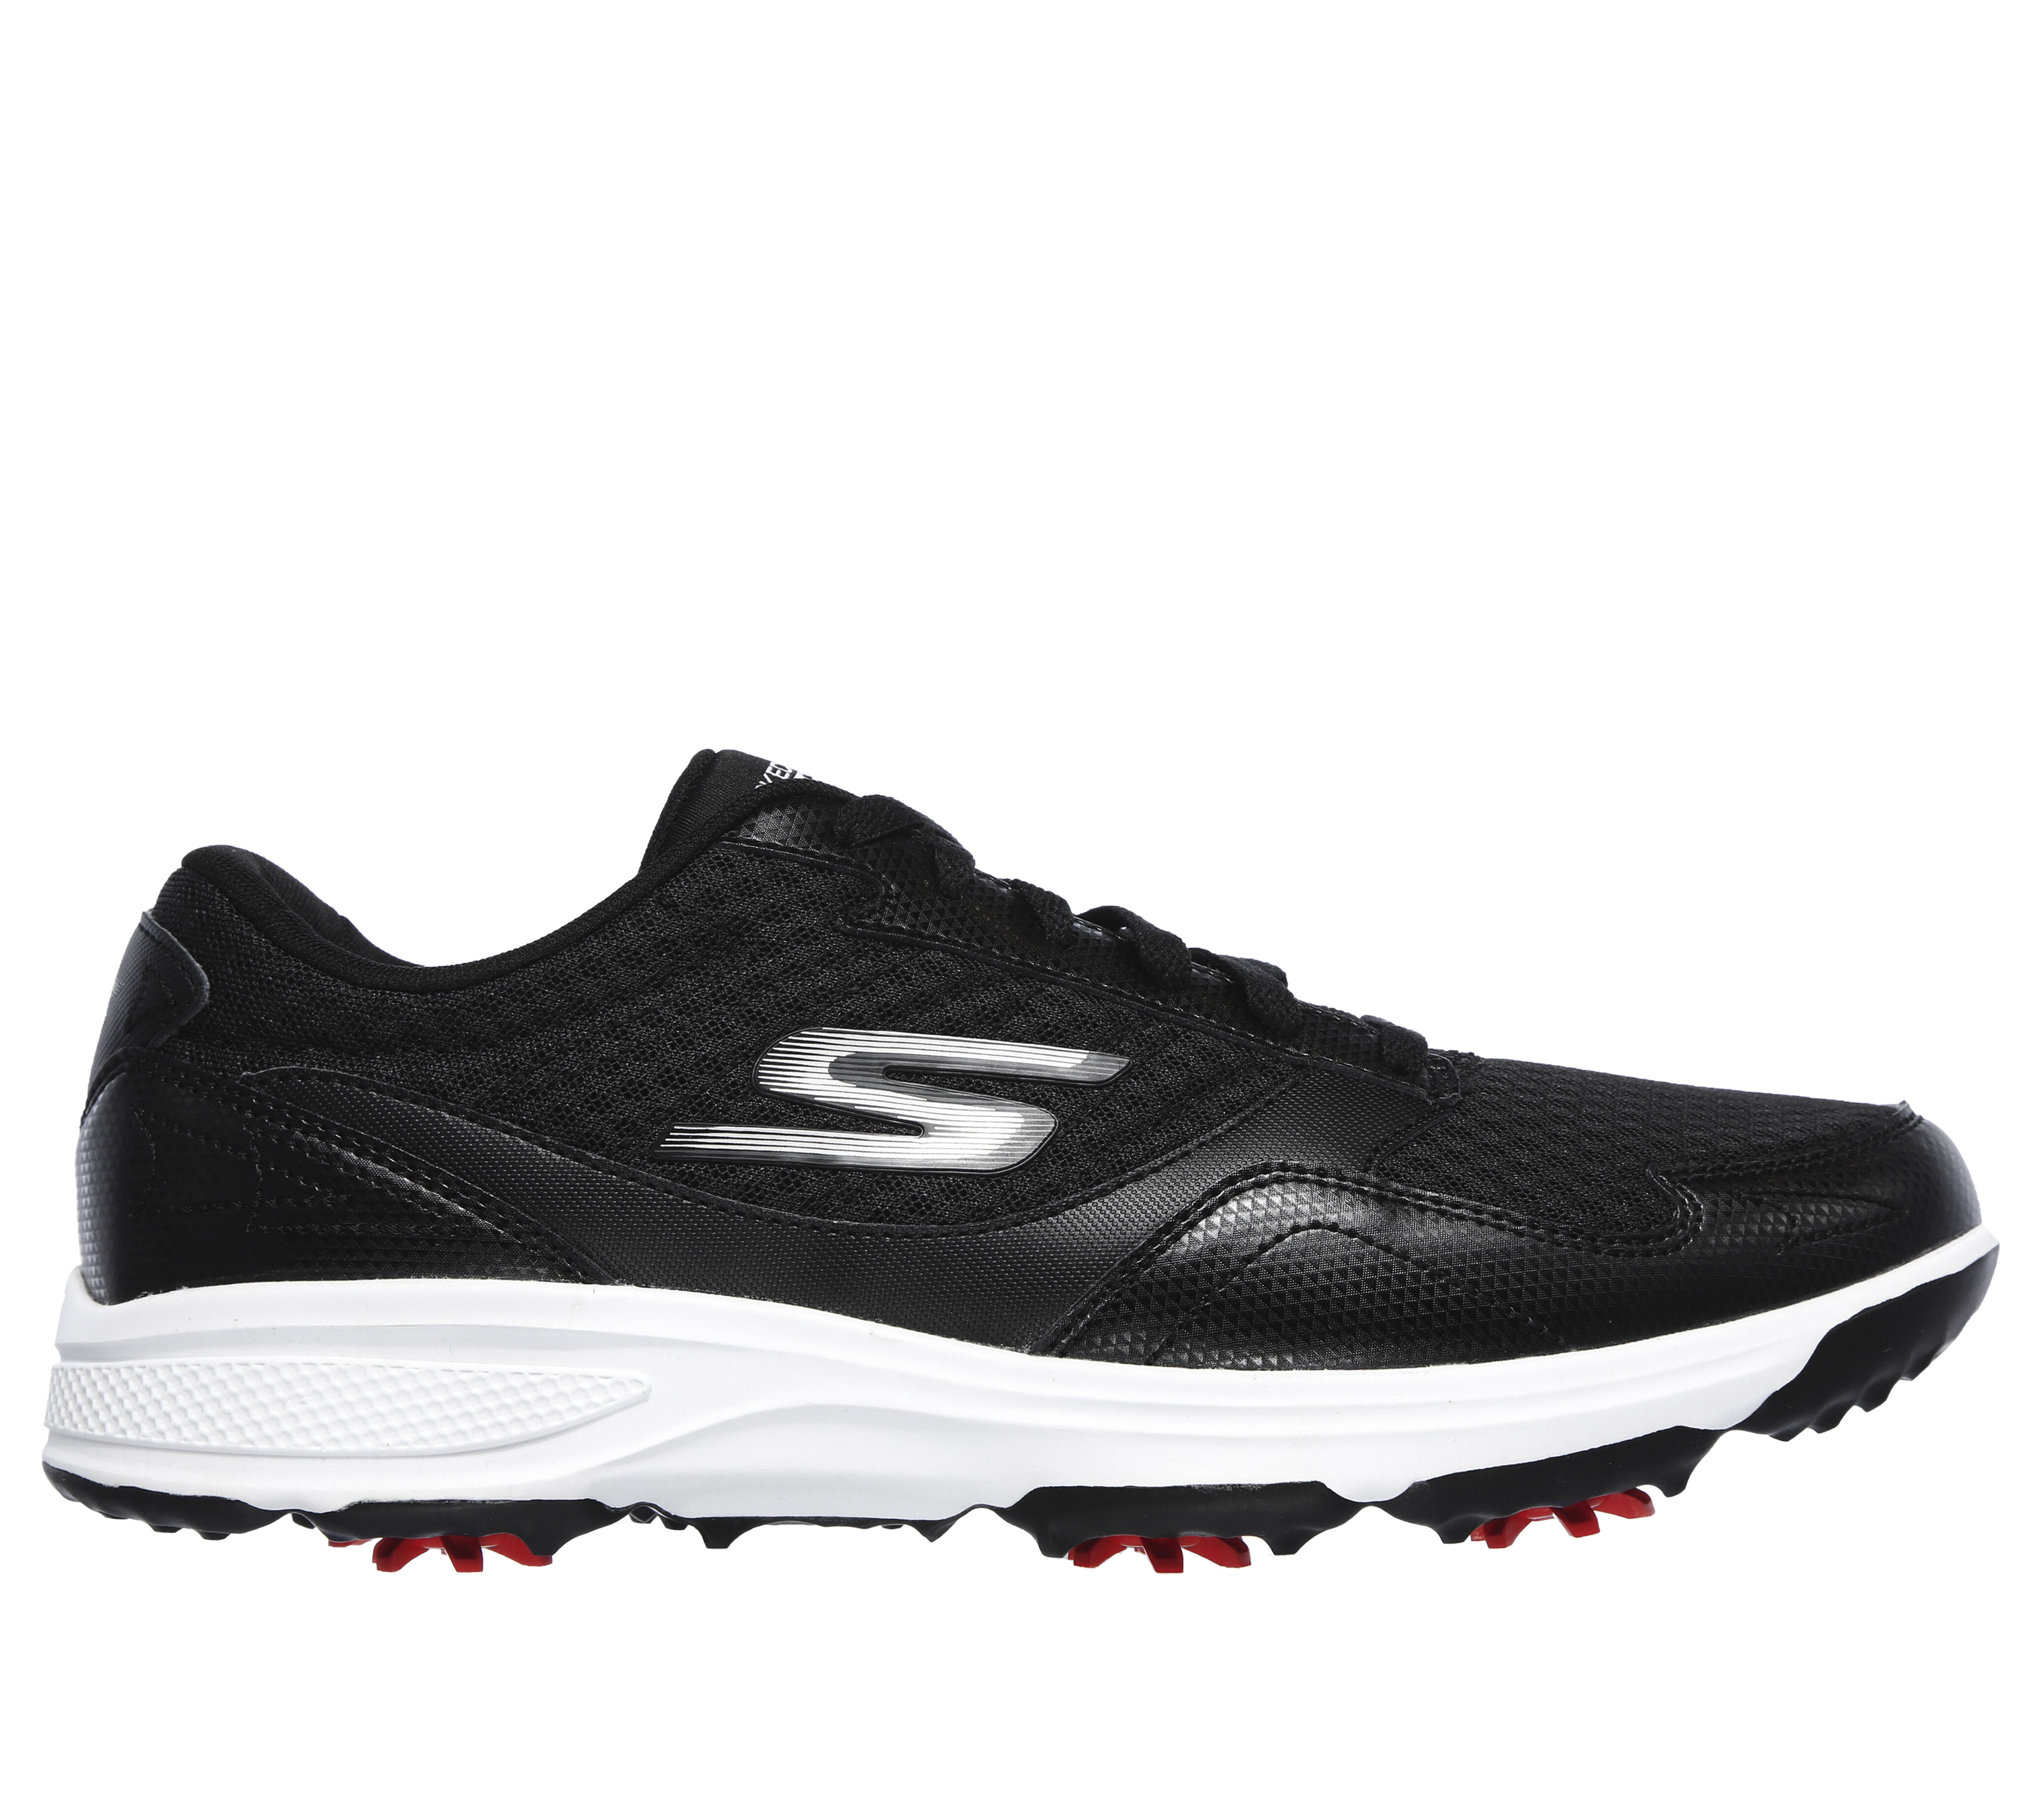 skechers golf shoes size 12